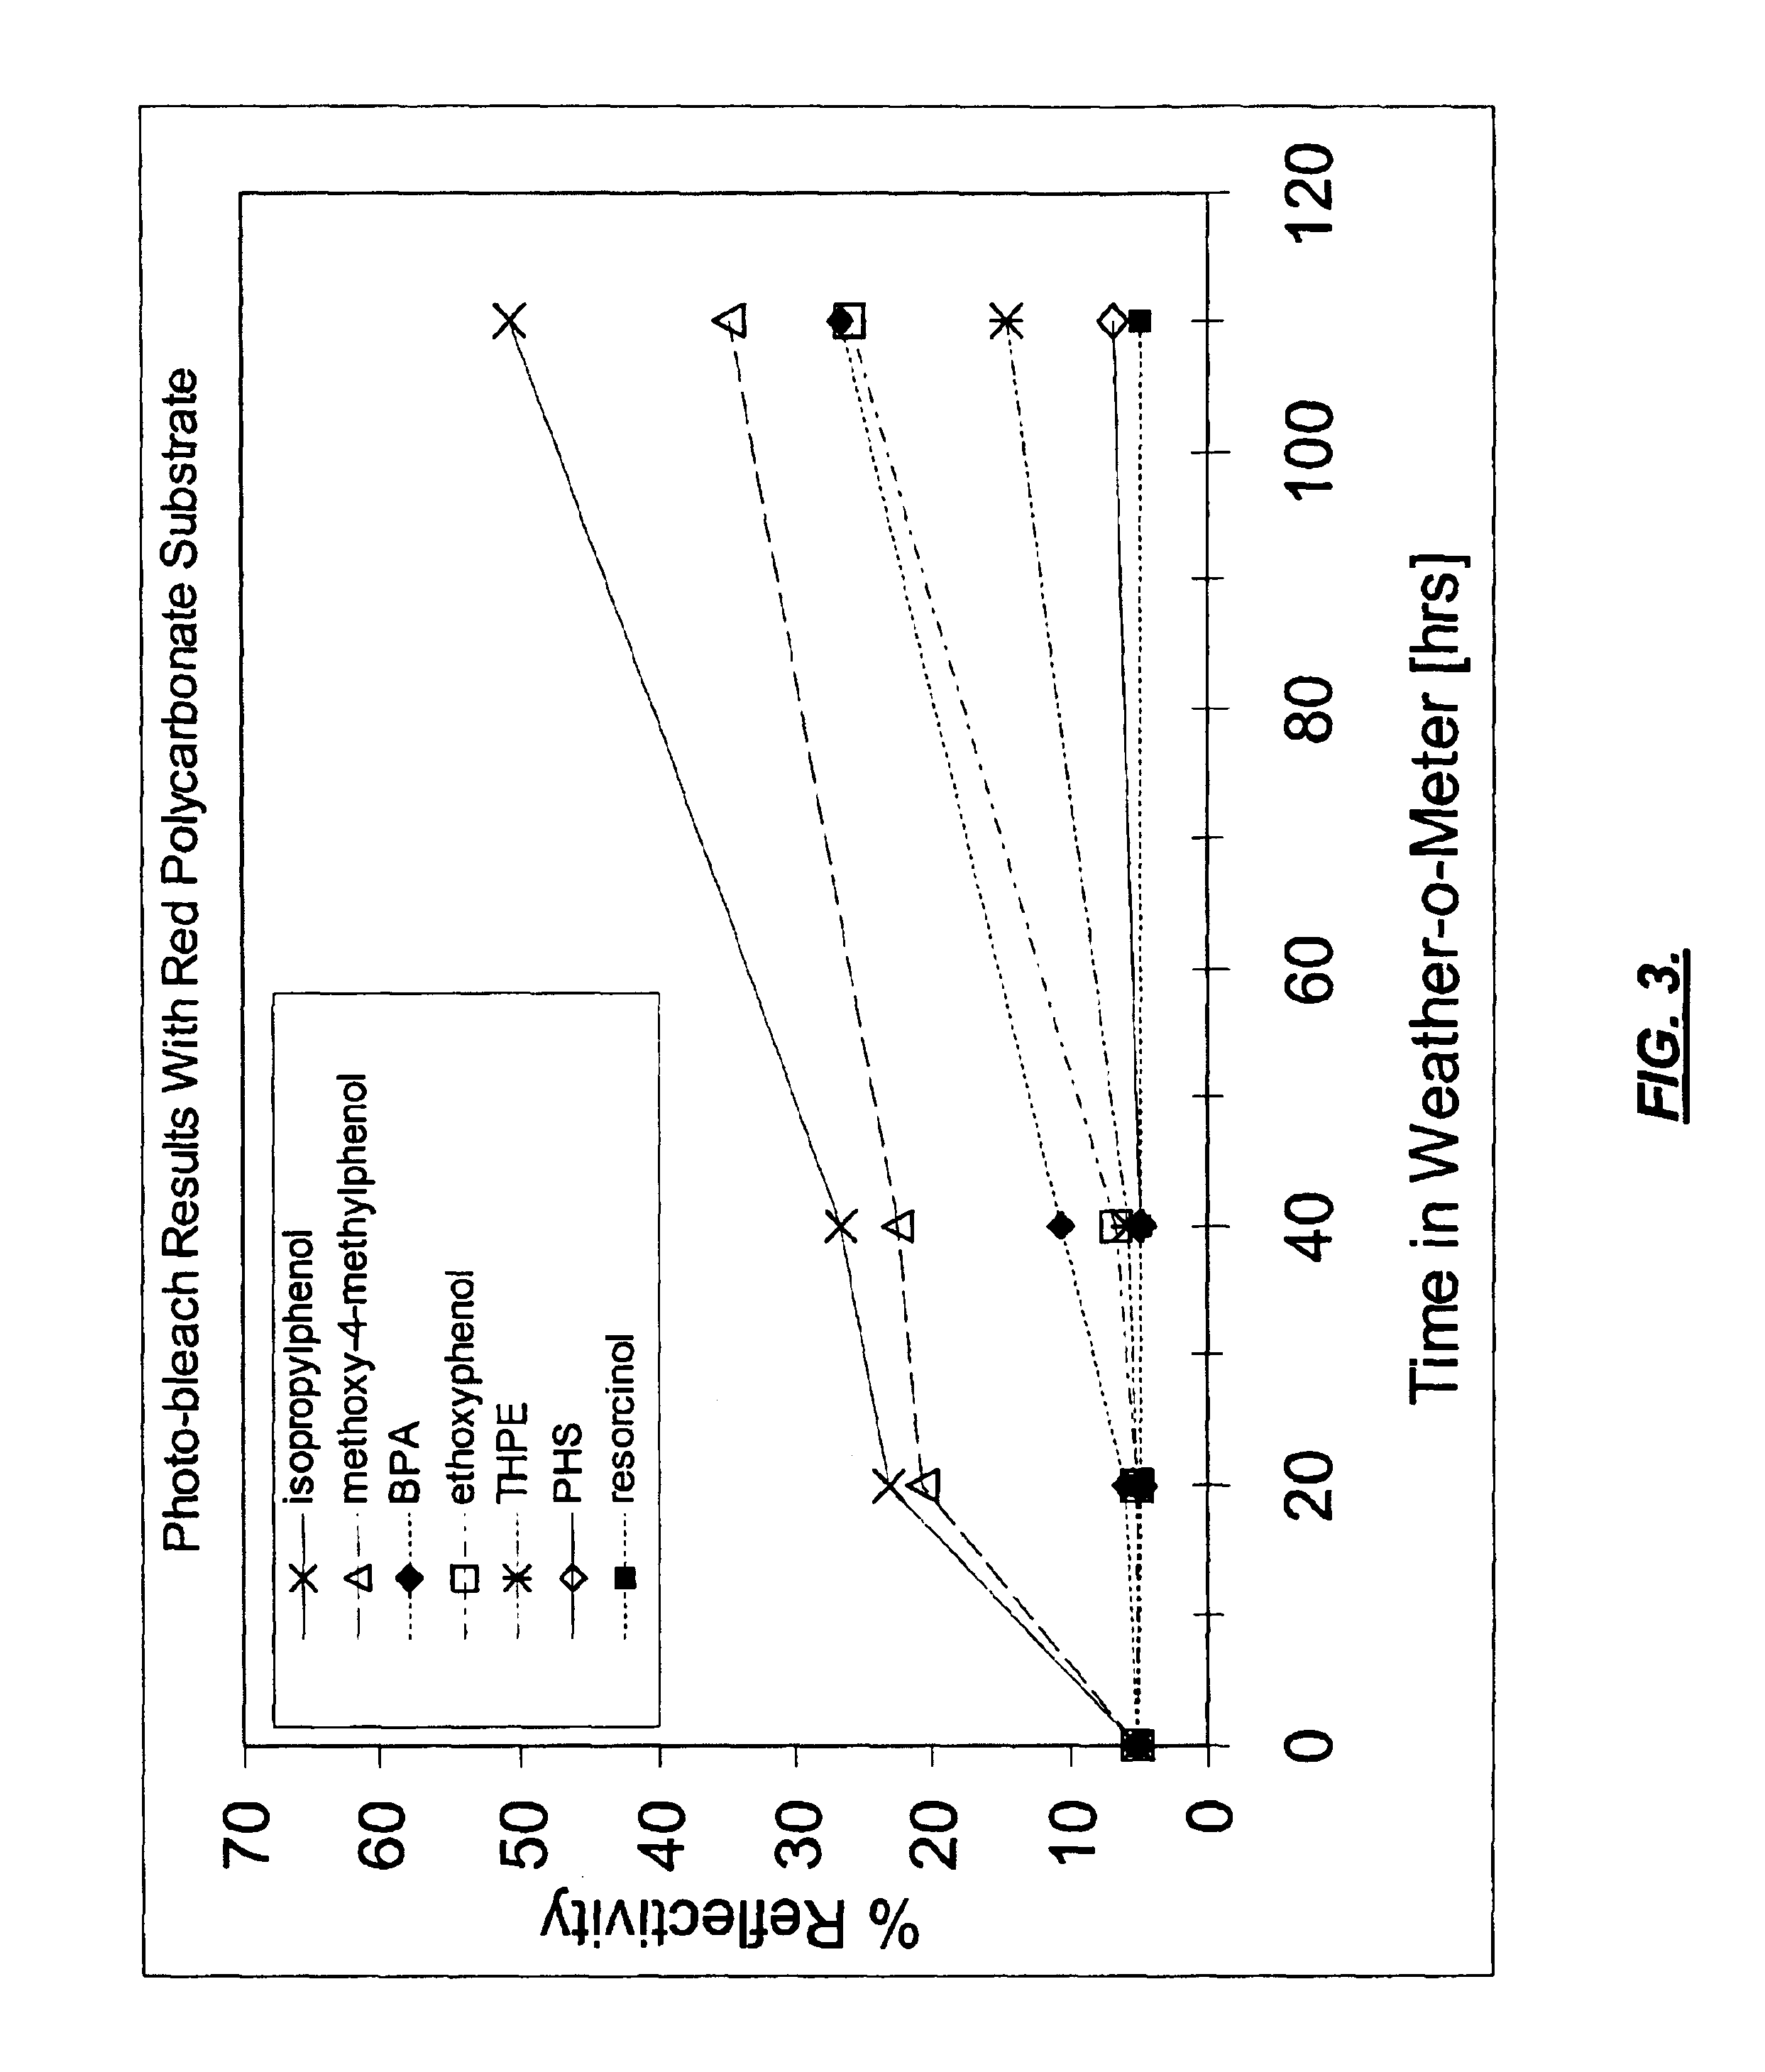 Limited play data storage media and associated methods of manufacture